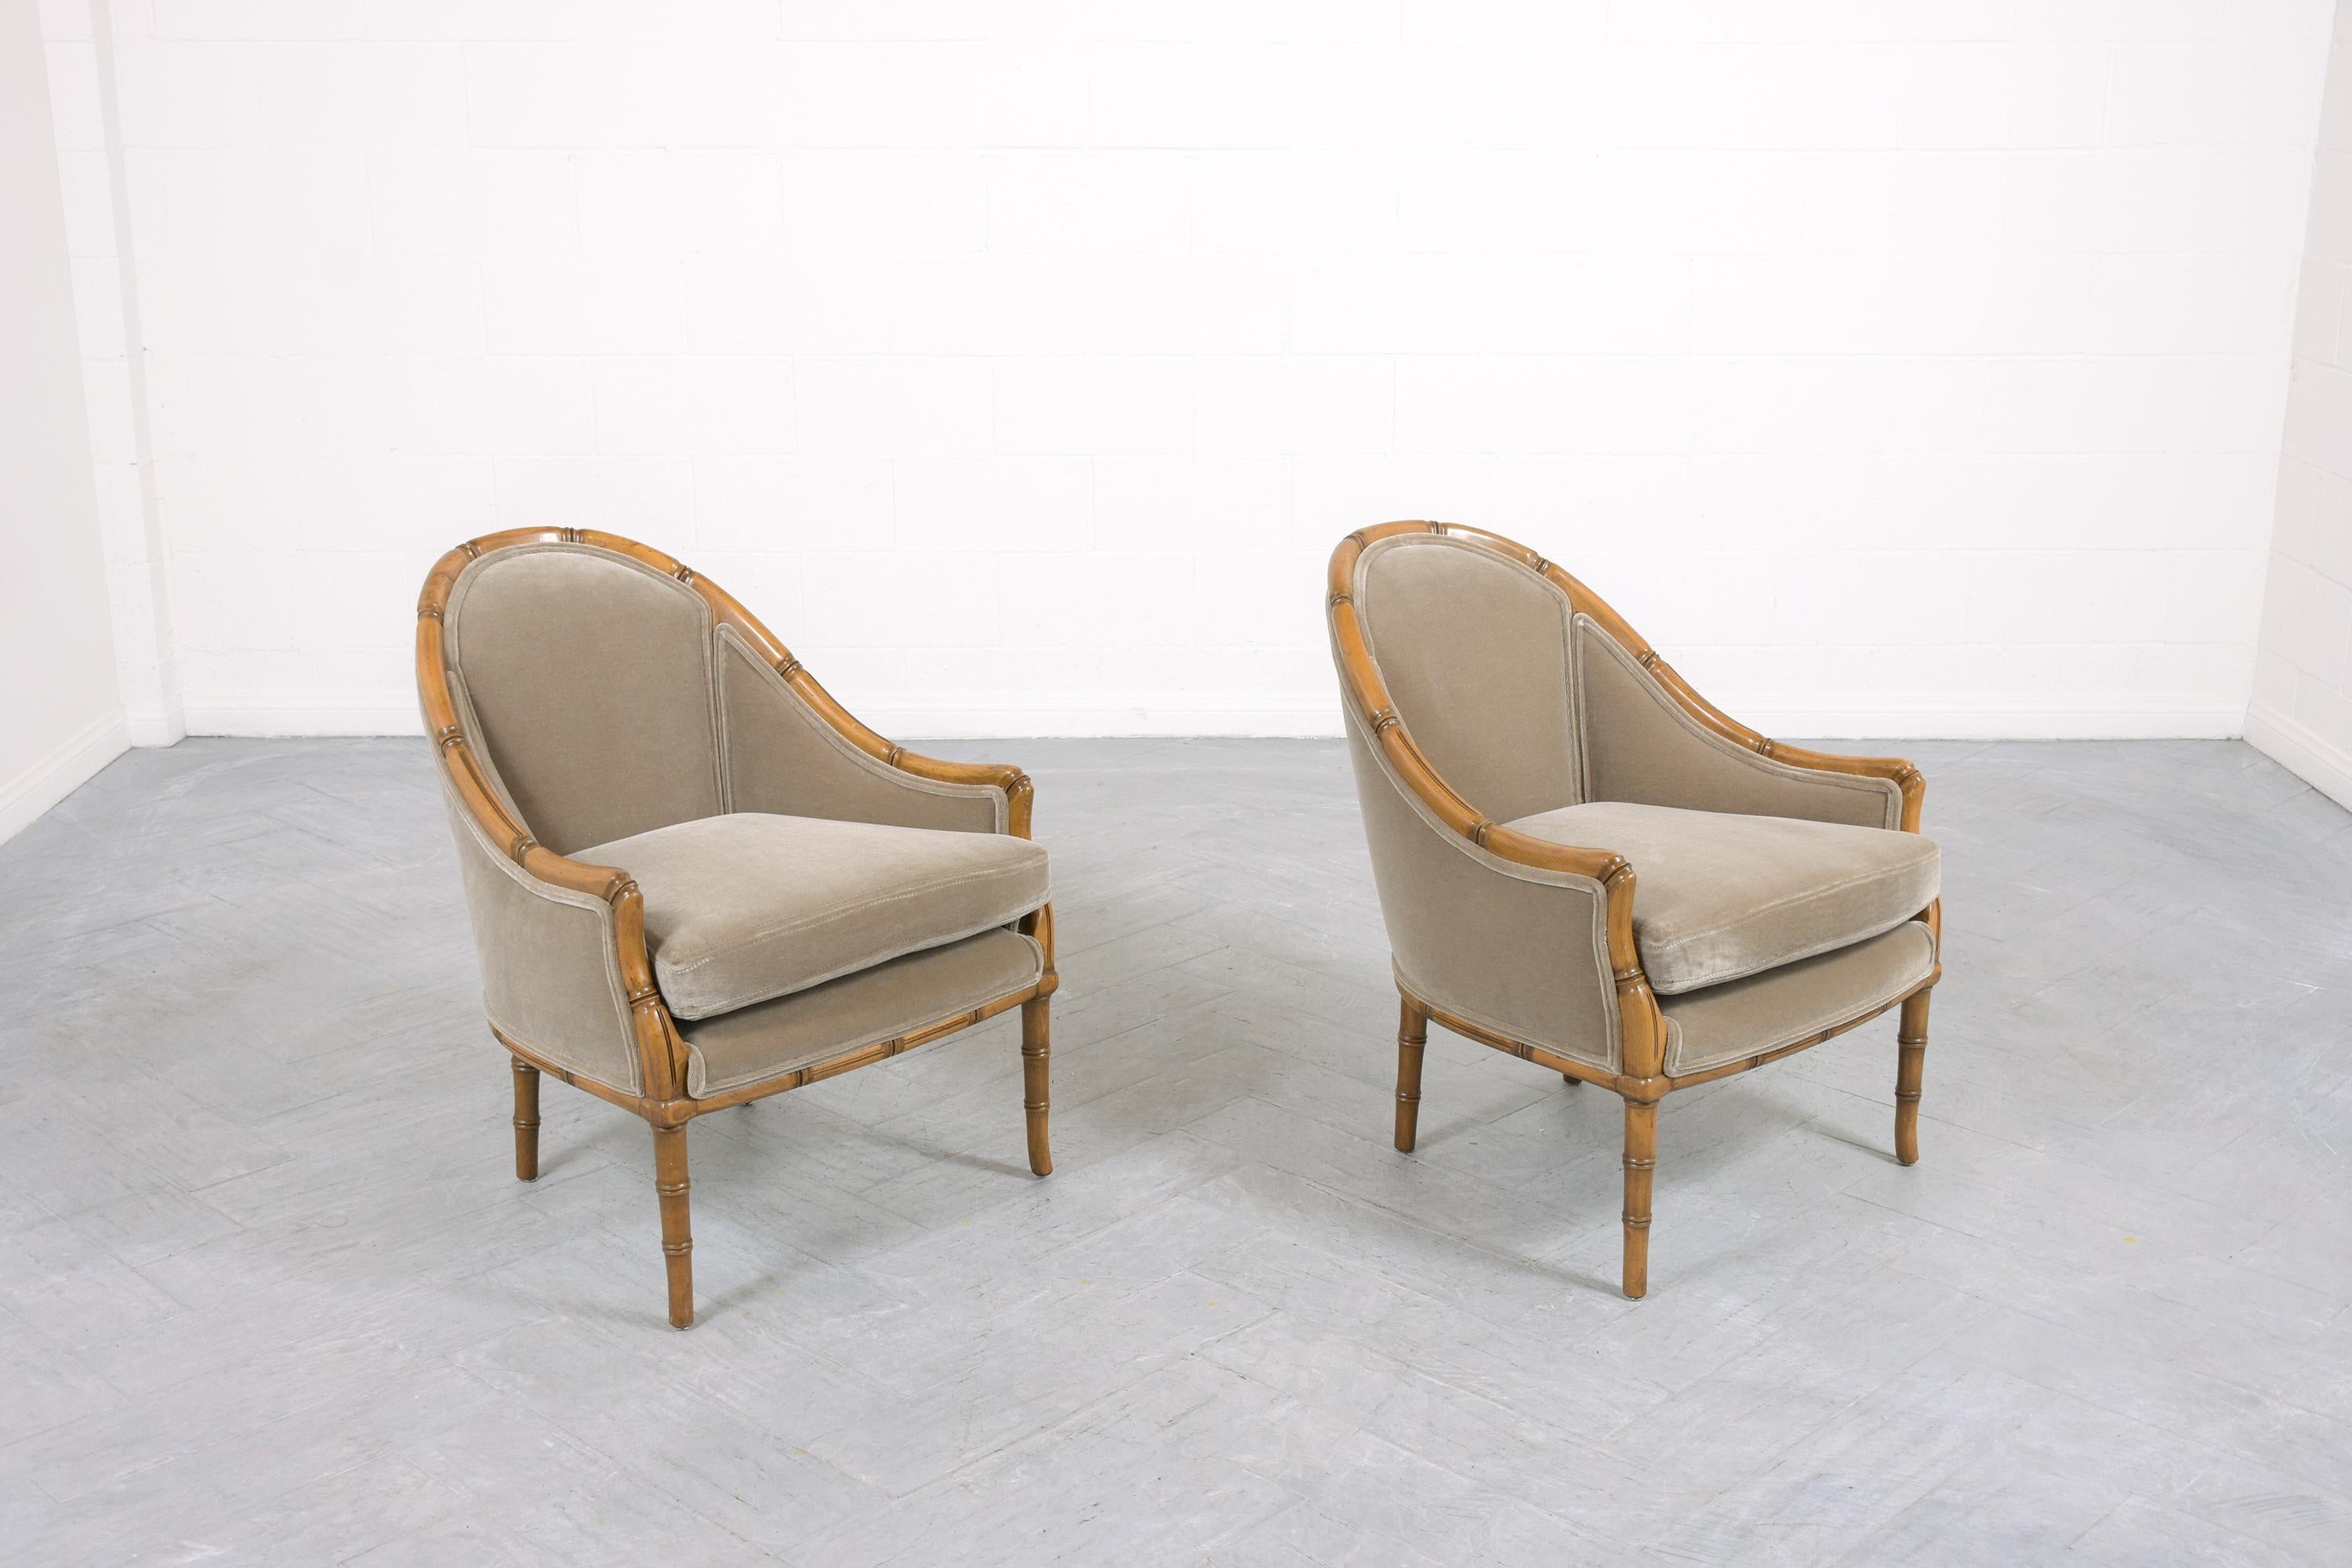 Chinese Chippendale Pair of Faux Bamboo Lounge Chairs